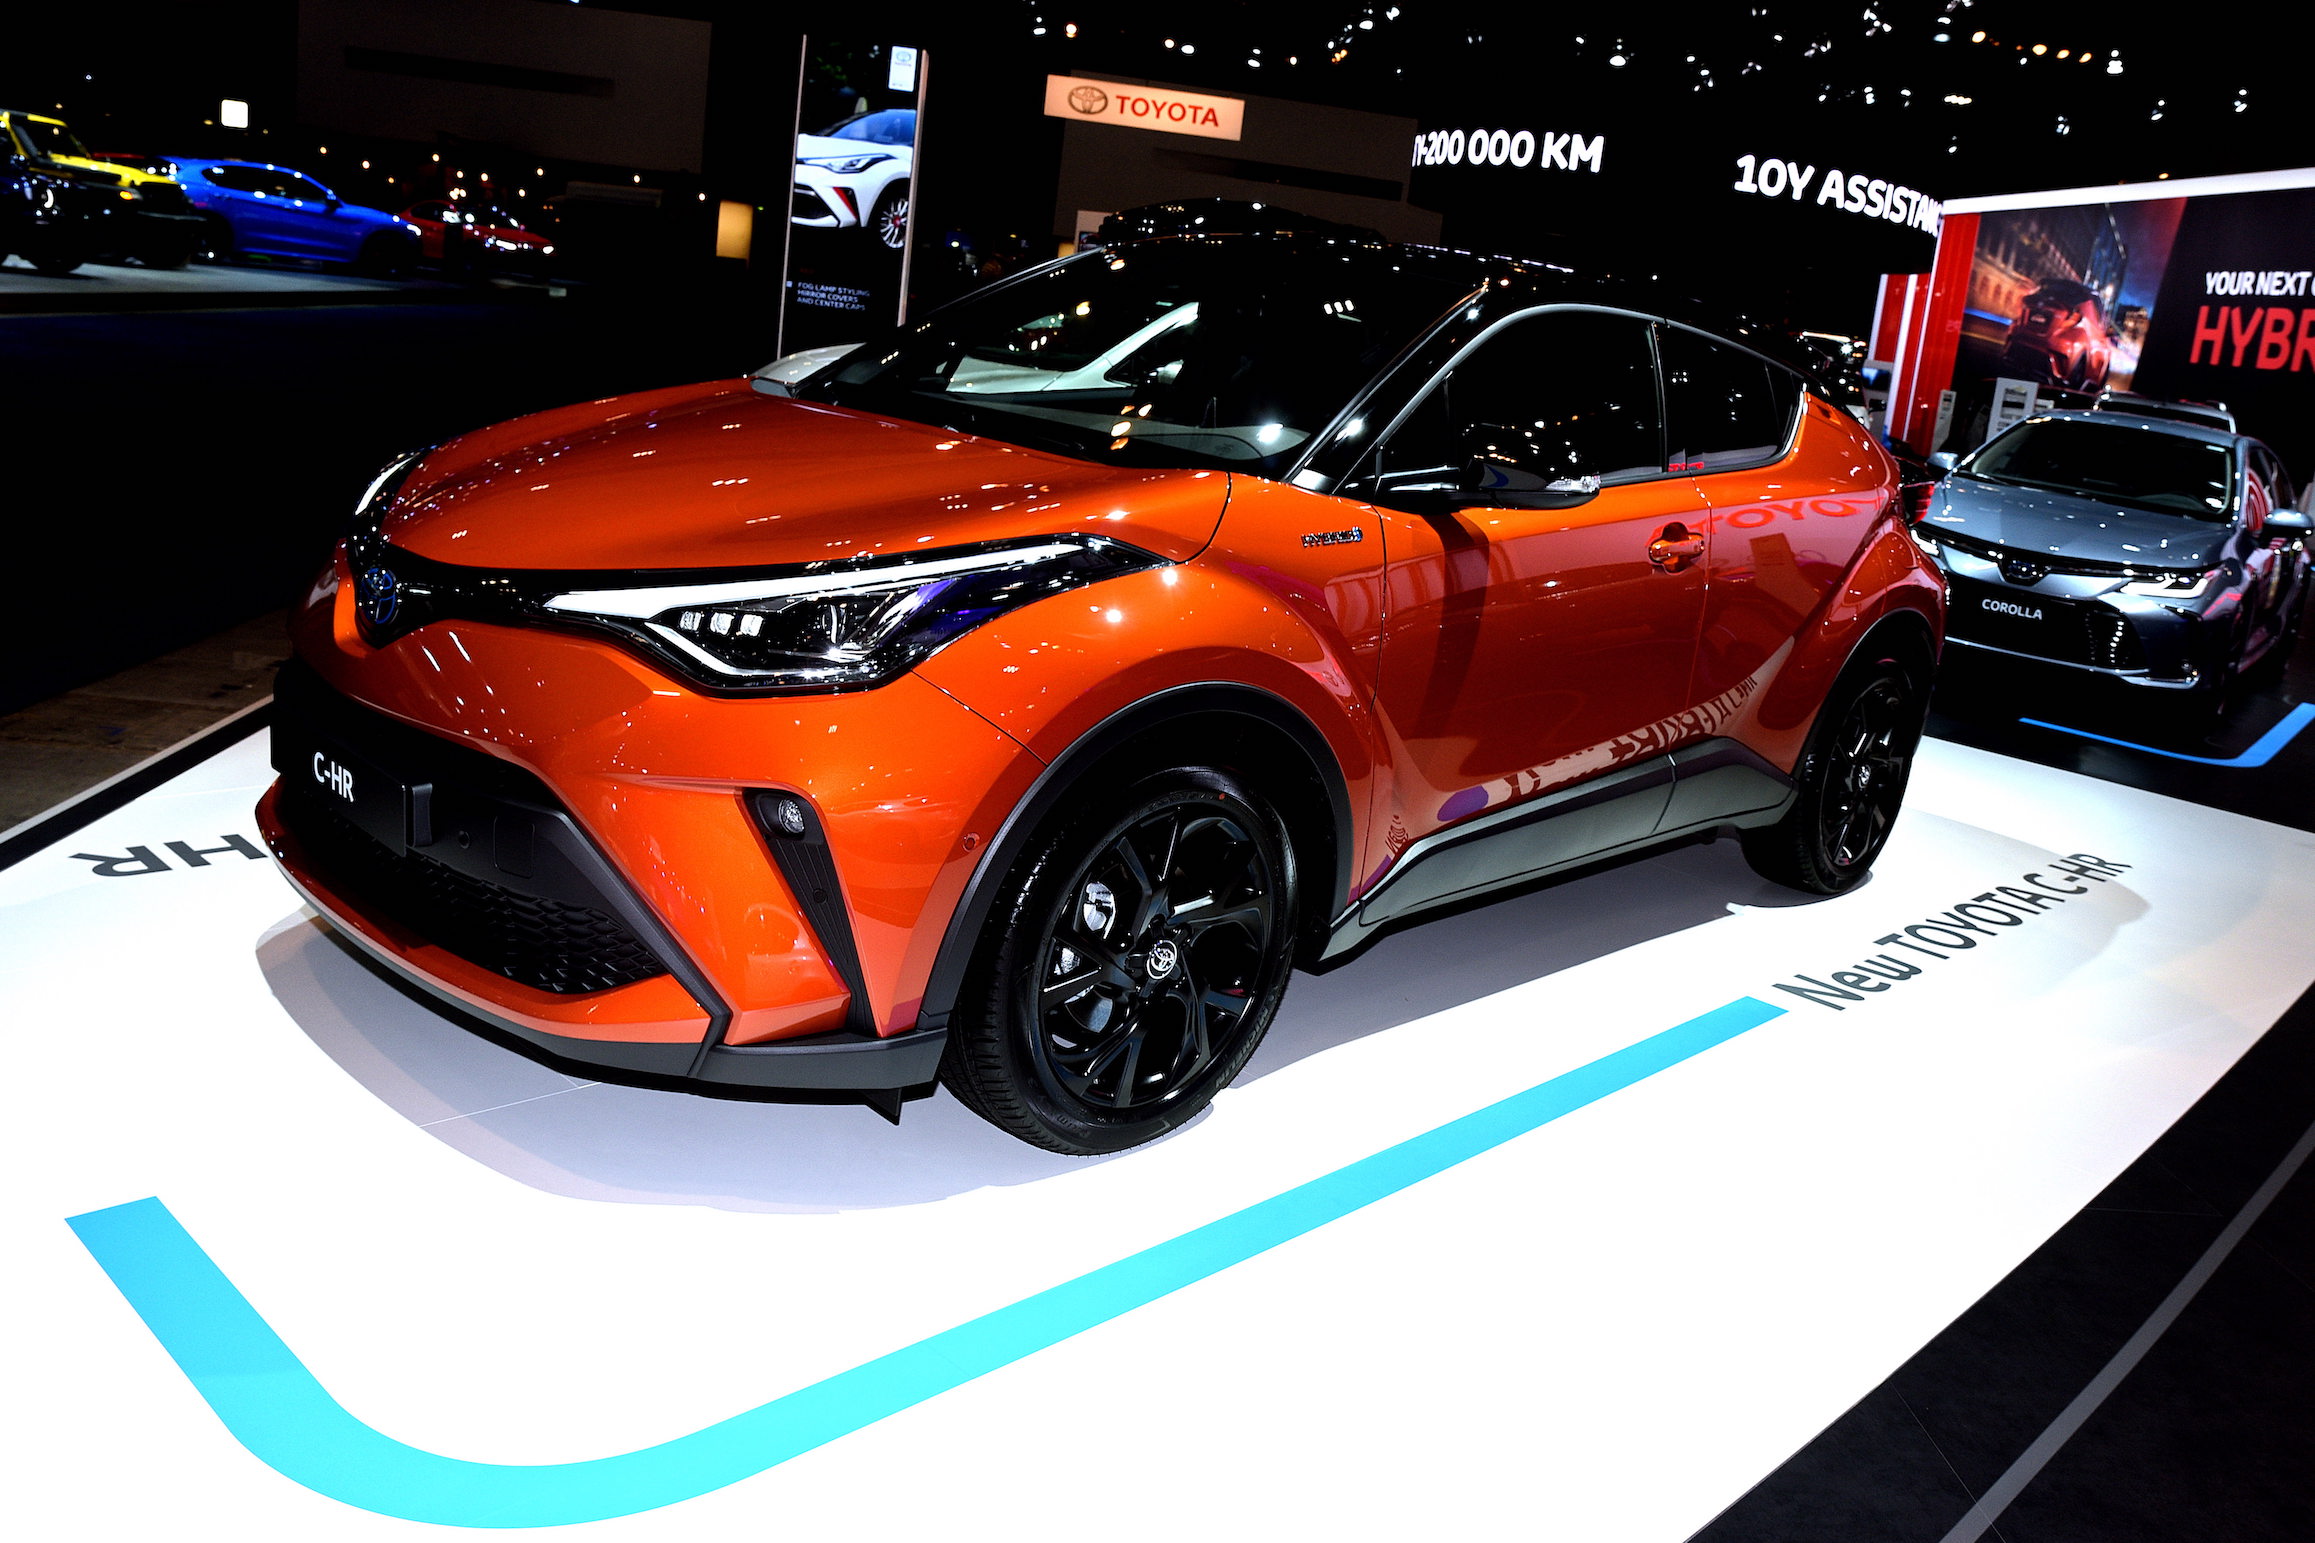 The new Toyota C-HR on display in front of the Toyota Corolla at the Brussels Motor Show